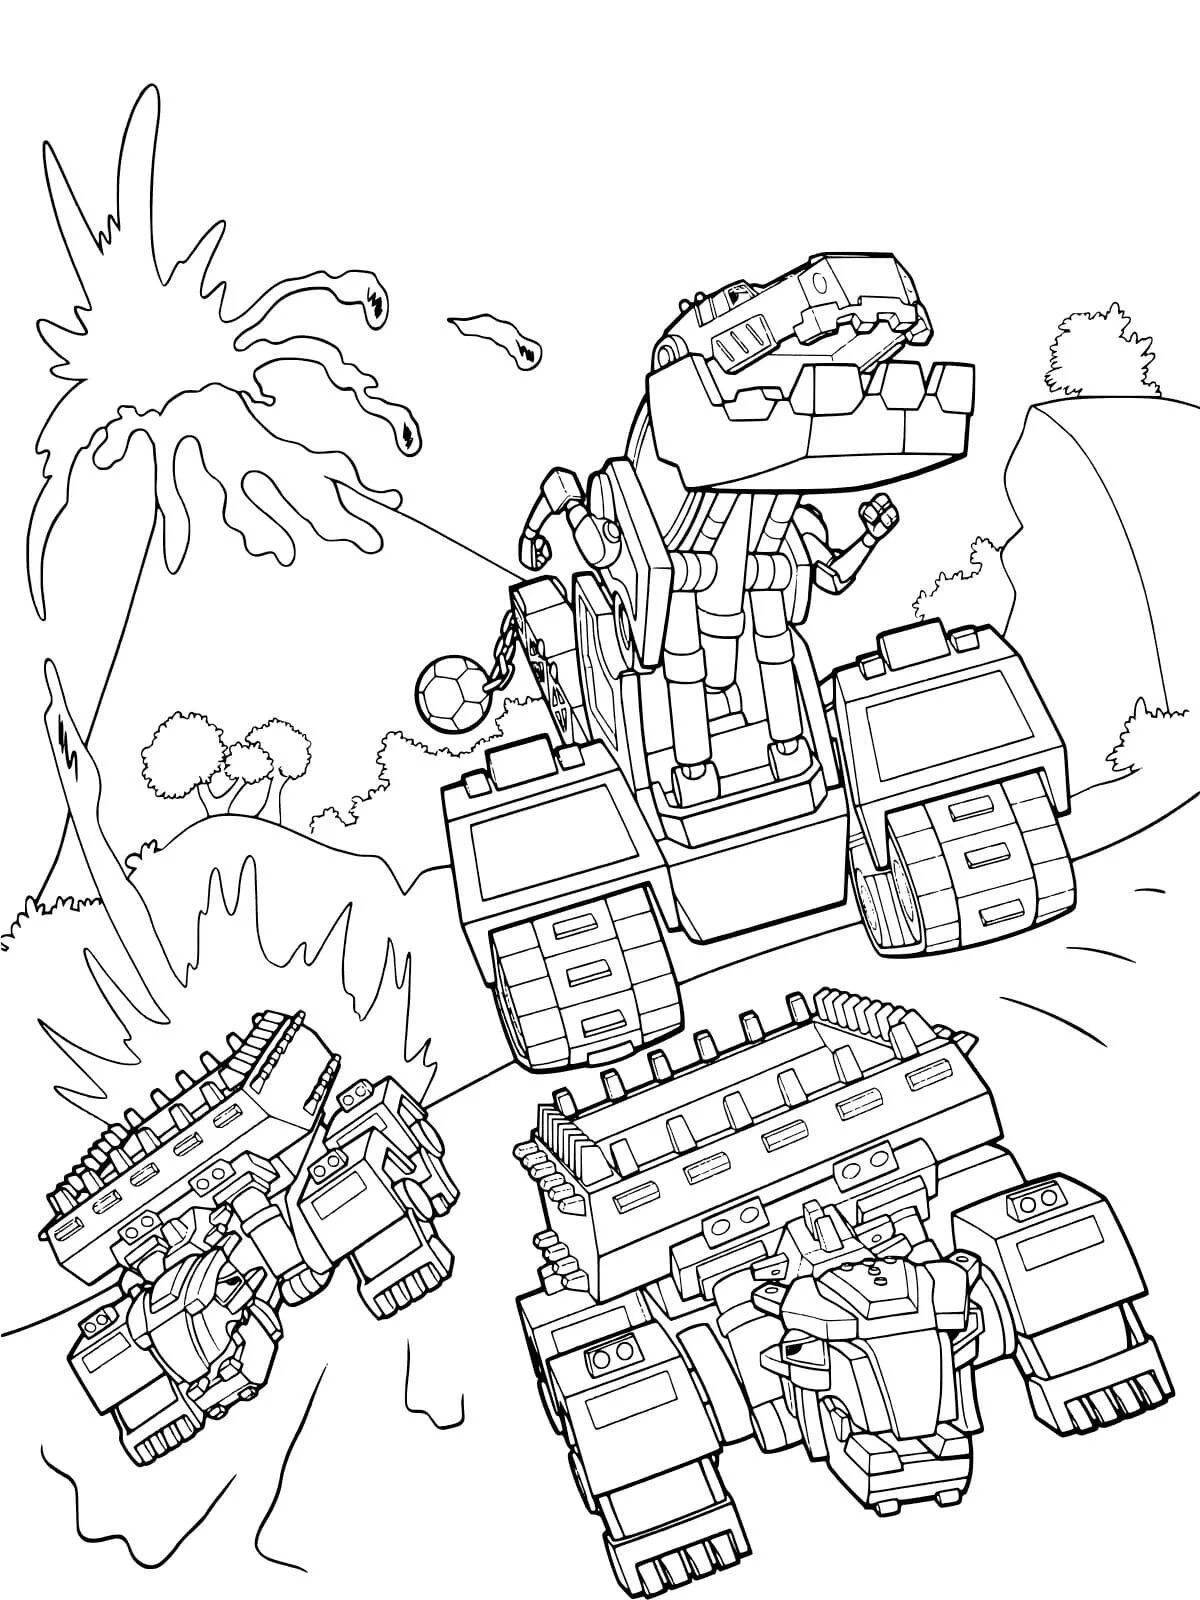 Coloring page funny caterpillar robot